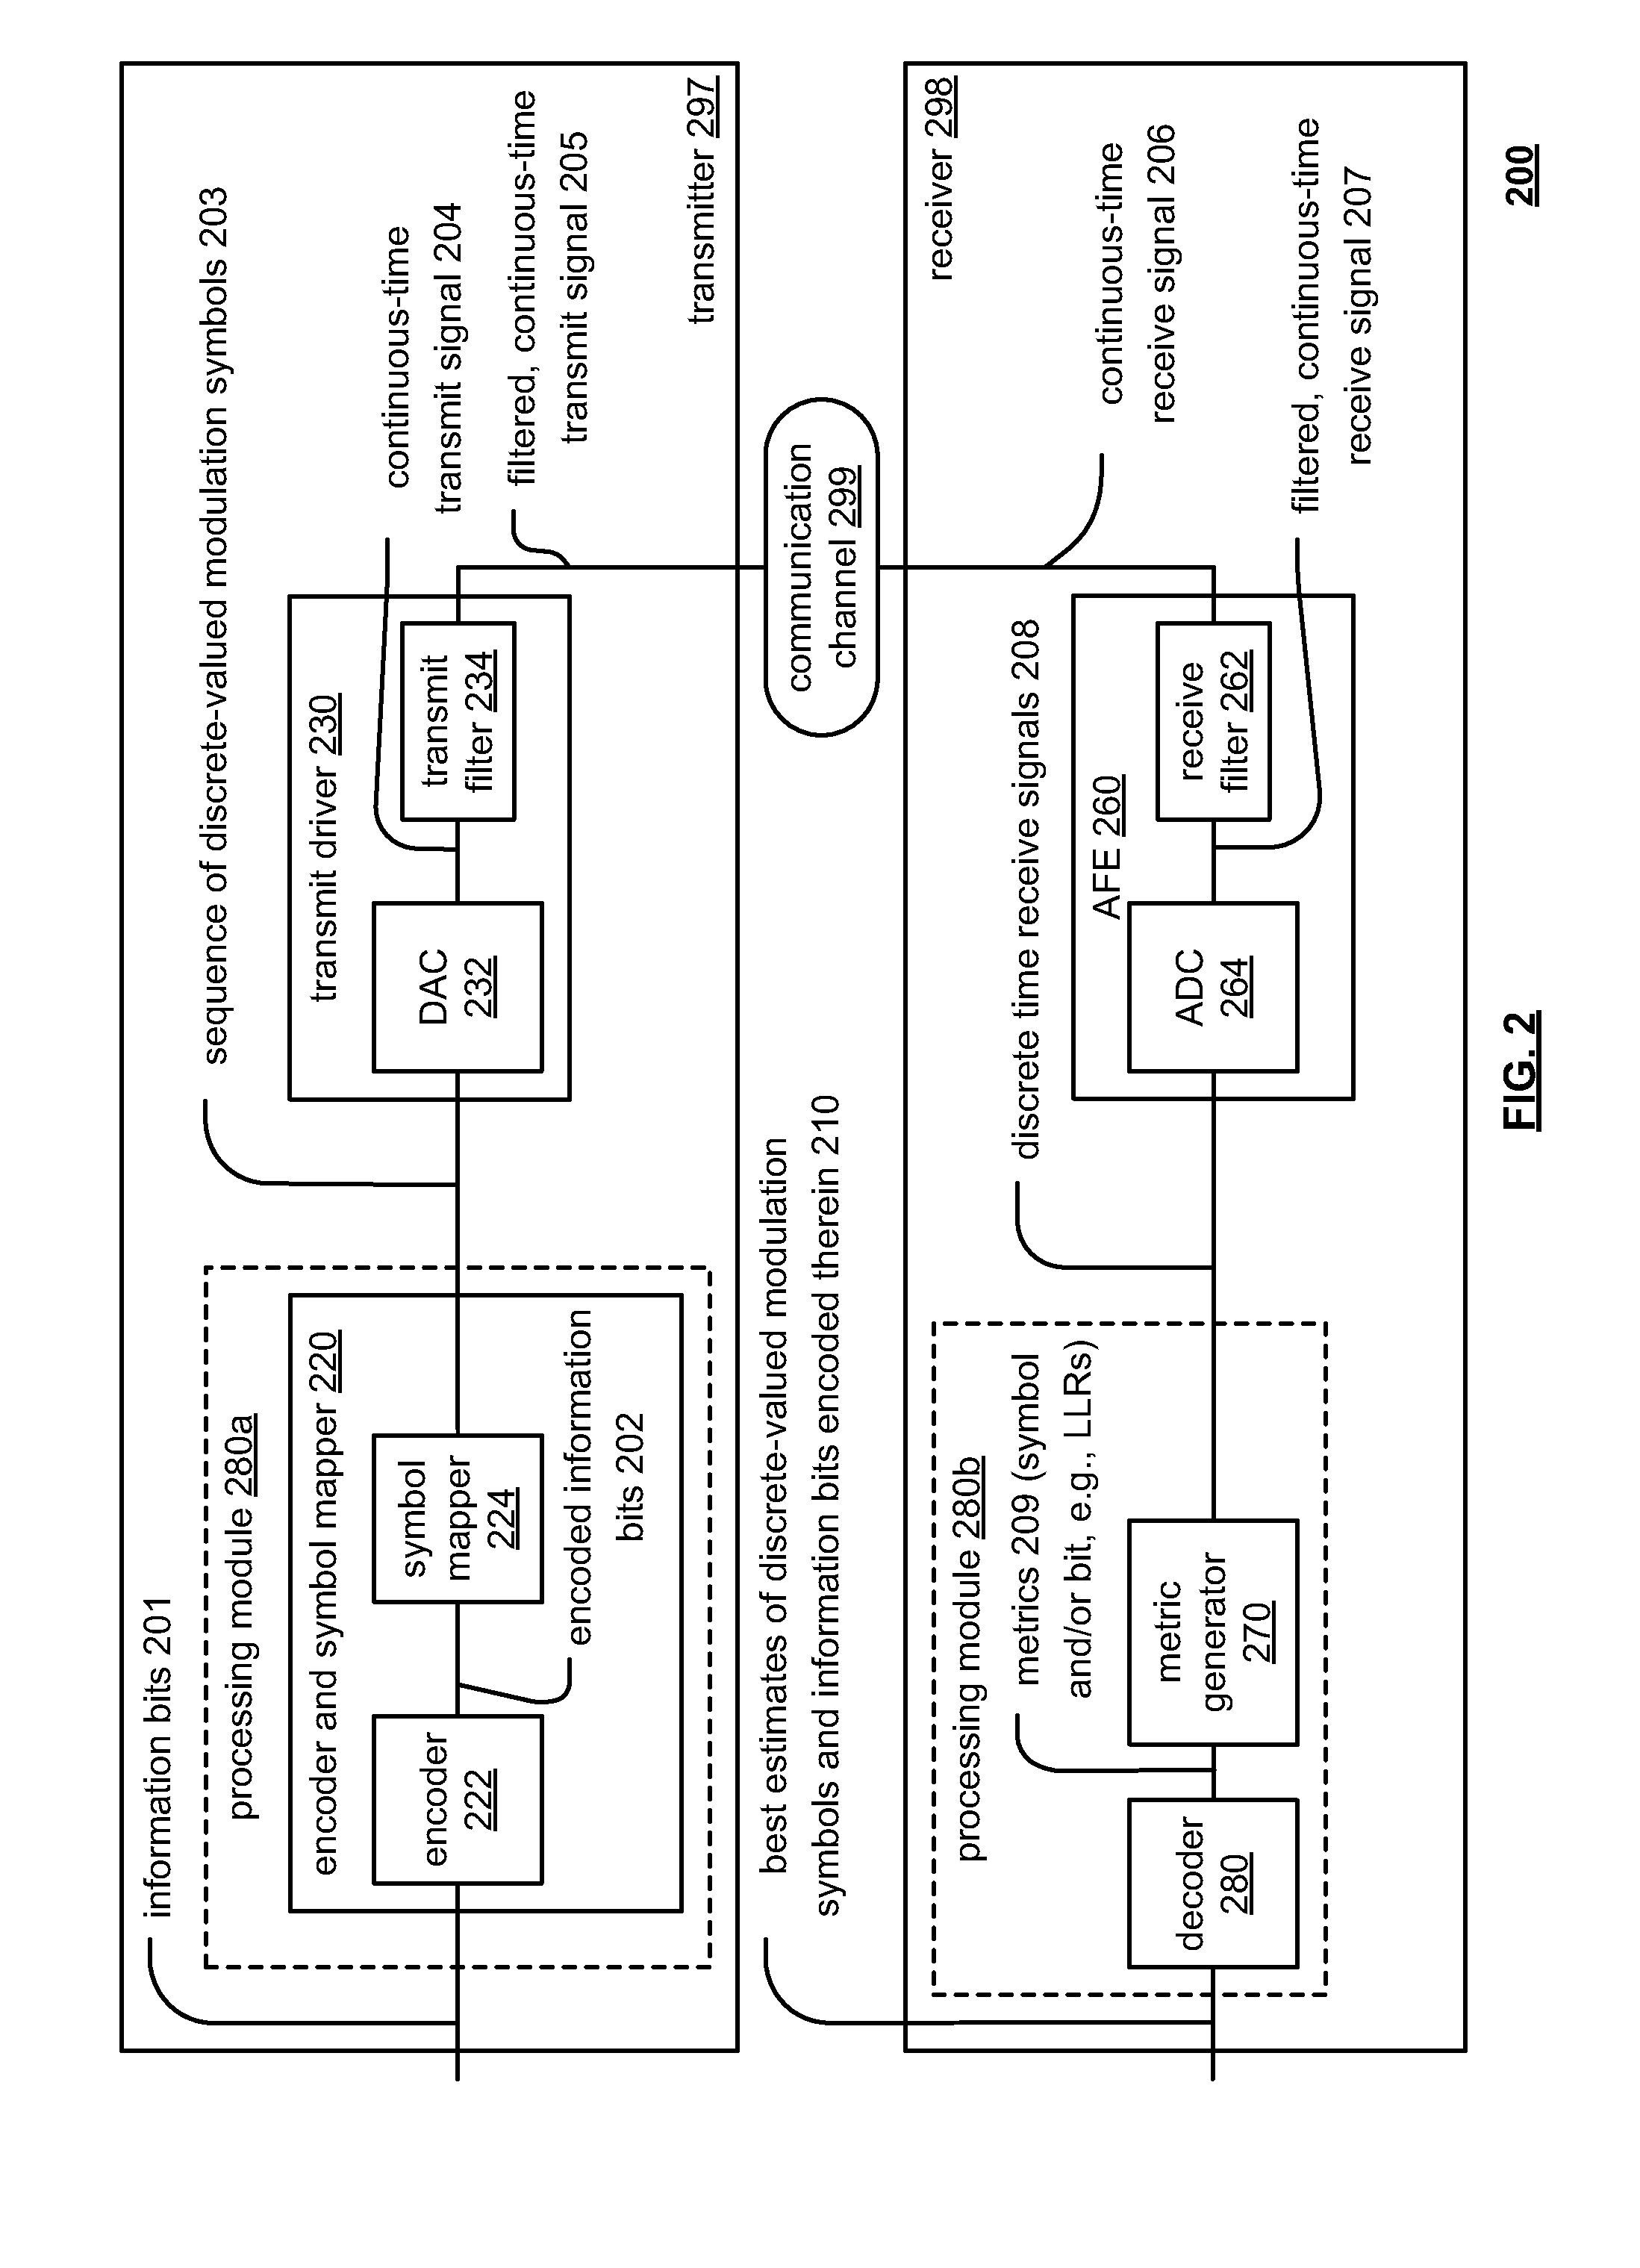 Sample adaptive offset (SAO) in accordance with video coding